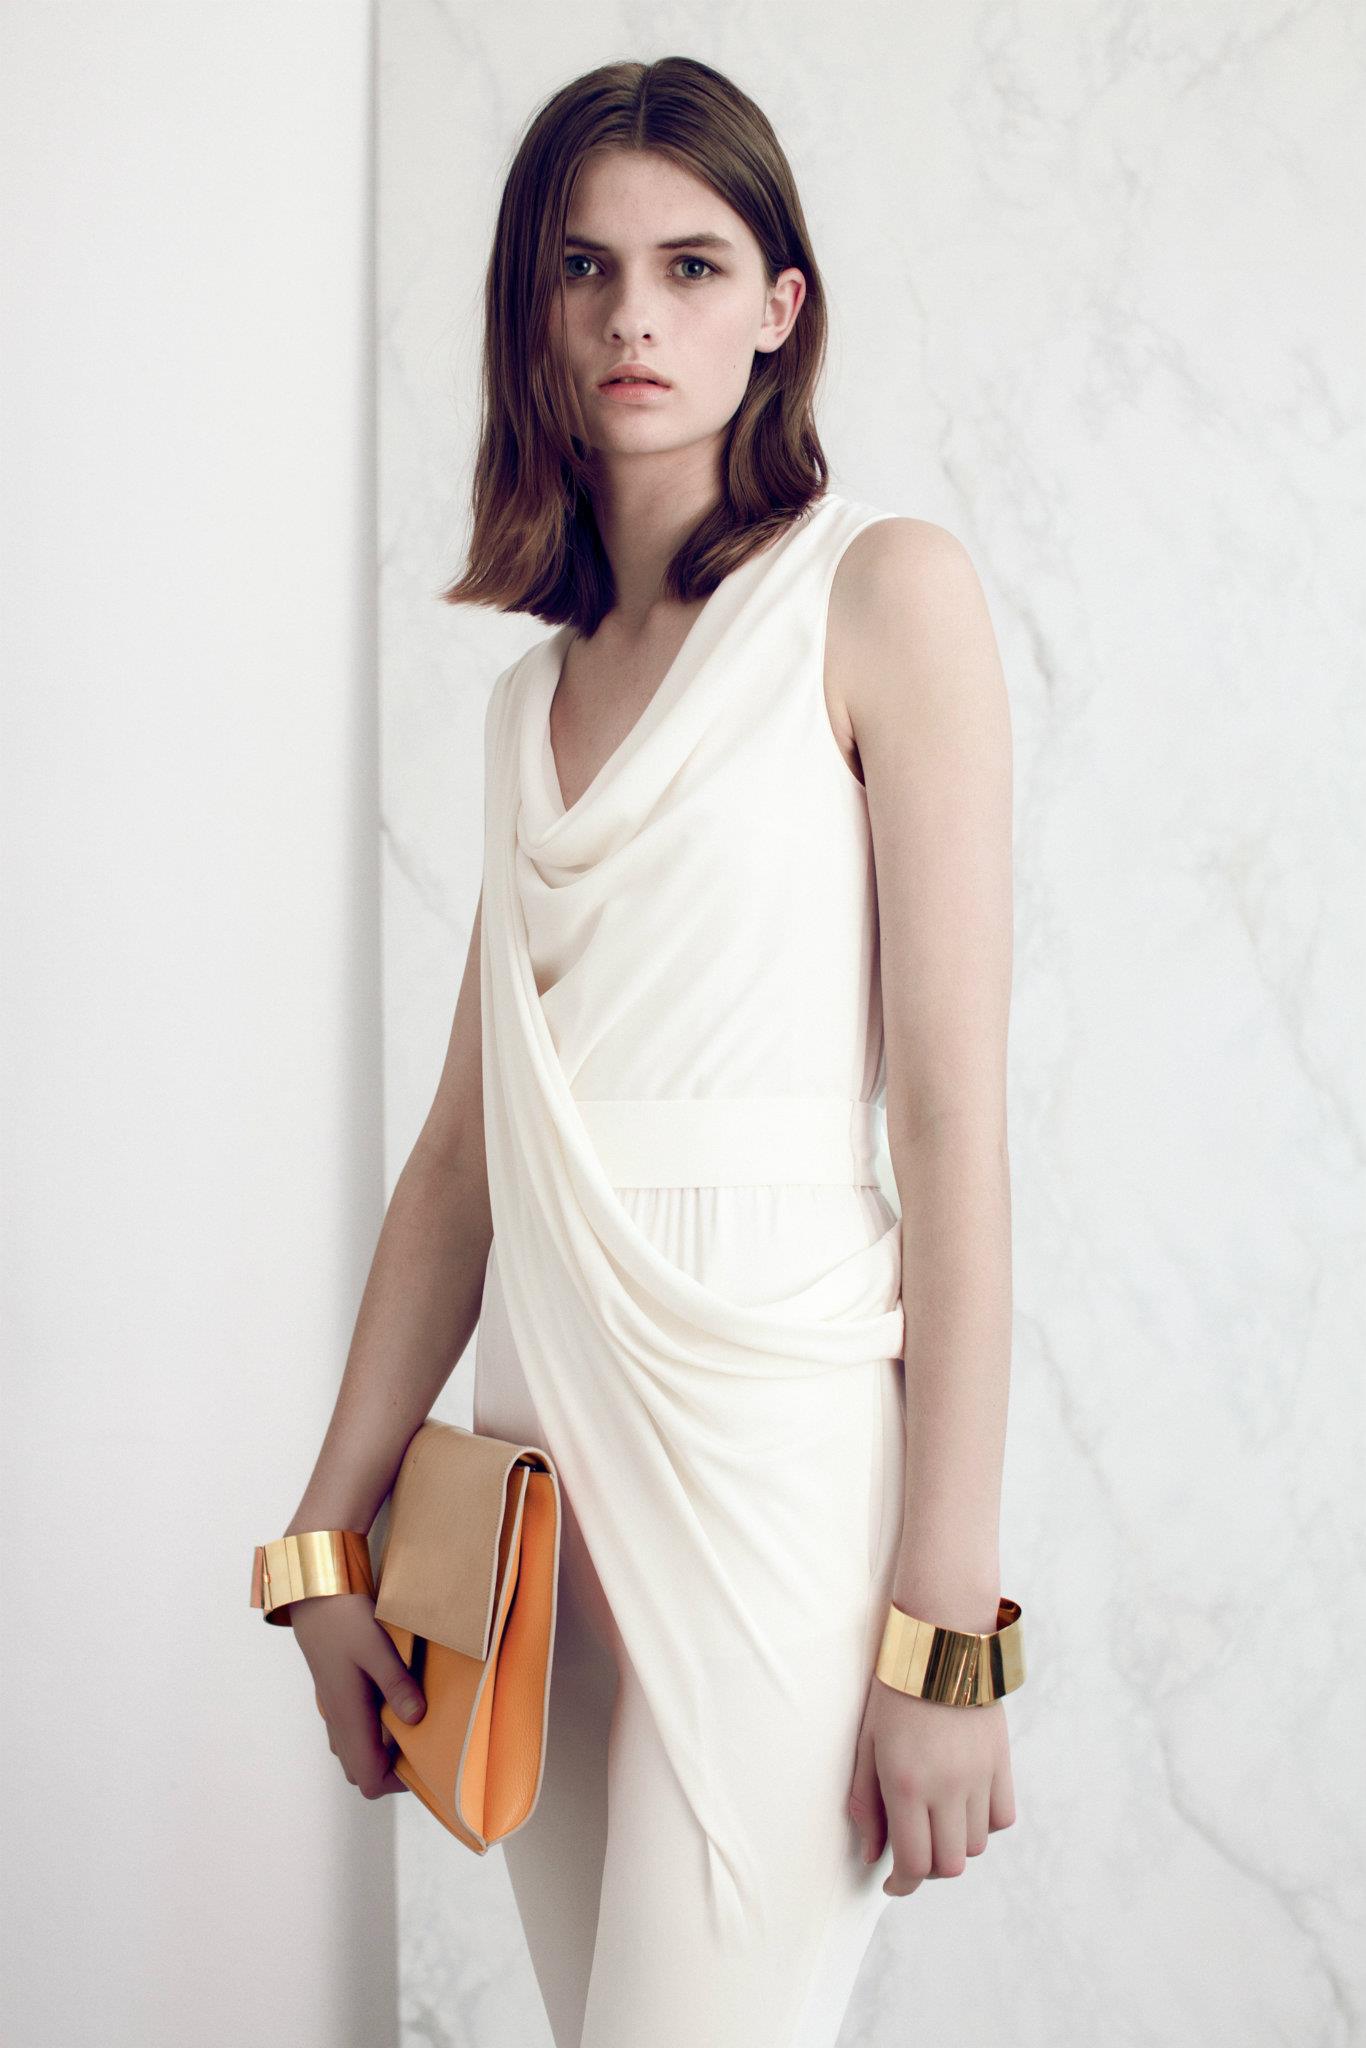 Vionnet Spring 2013 Collection 21